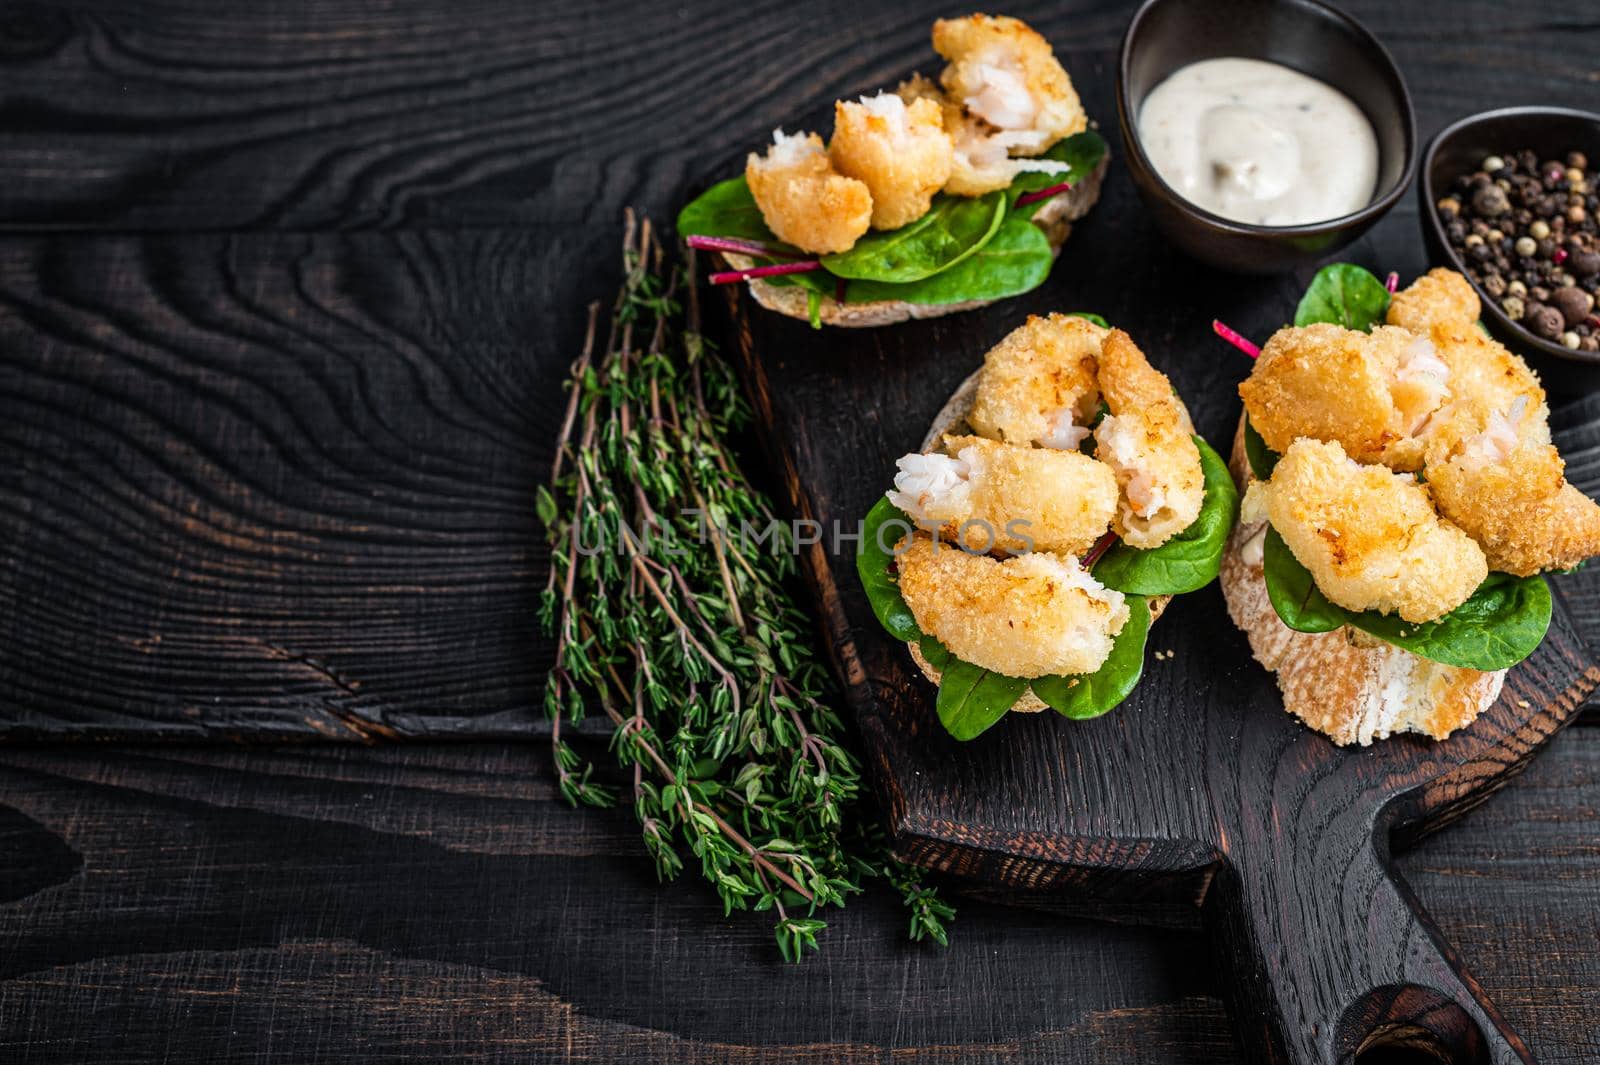 Toasts with Crispy Fried Shrimps Prawns and green salad on a wooden board. Black wooden background. Top view. Copy space.